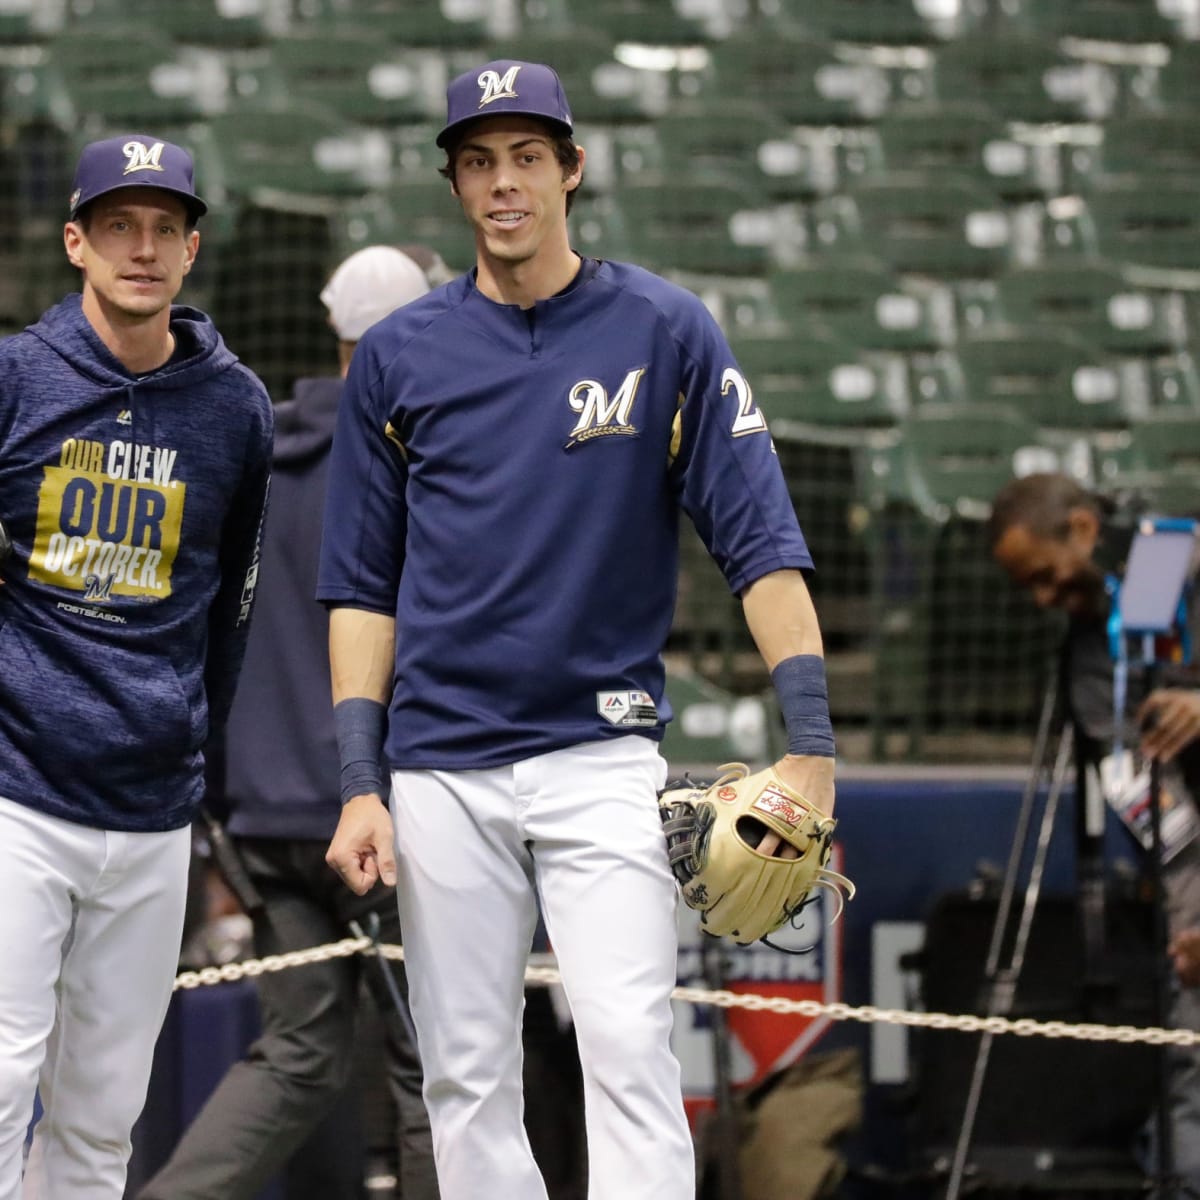 Craig Counsell through years, MLB player, member of Milwaukee Brewers